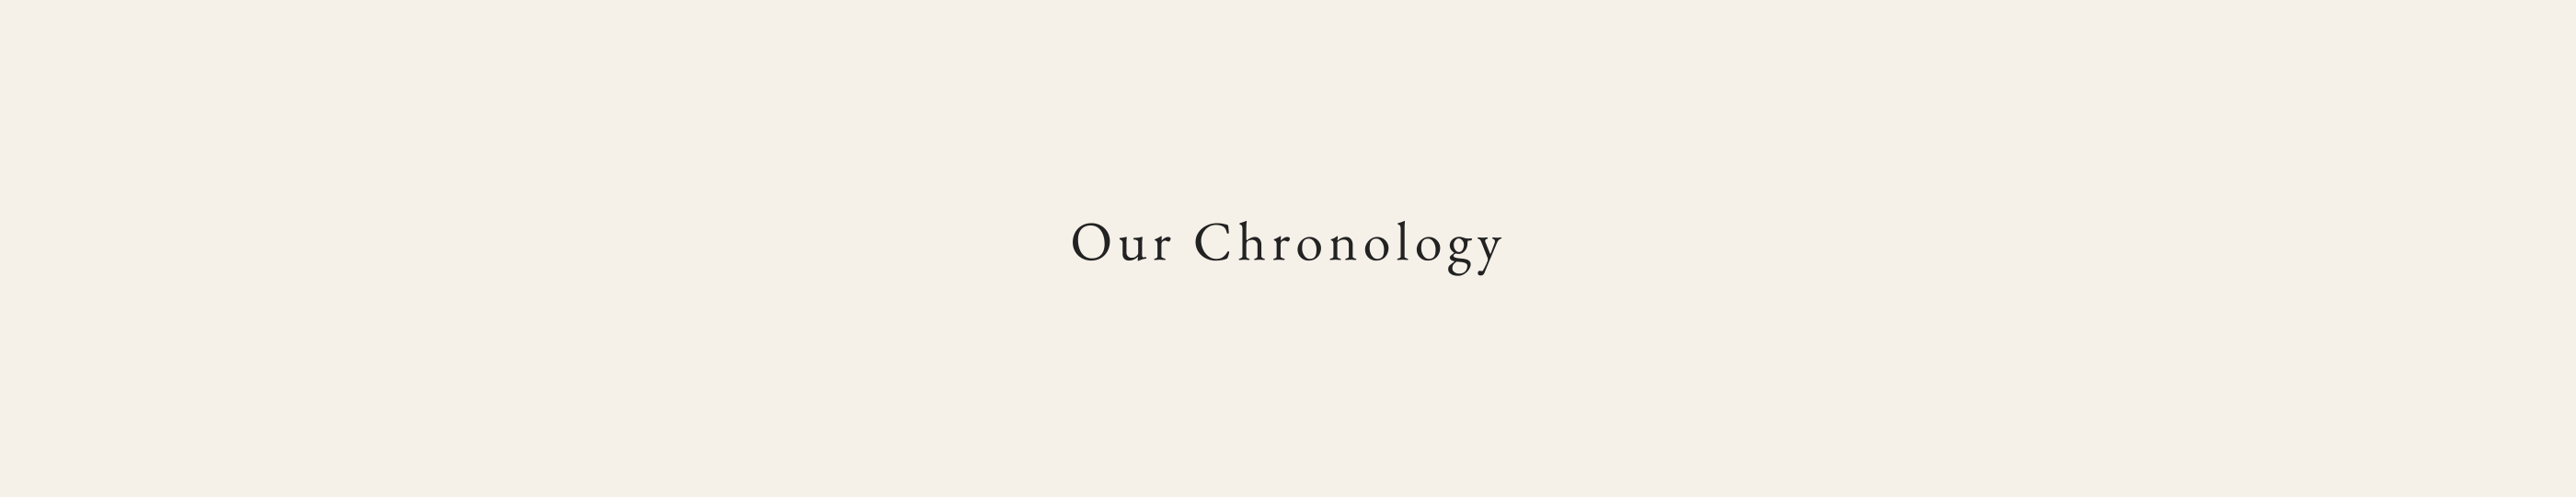 Our Chronology